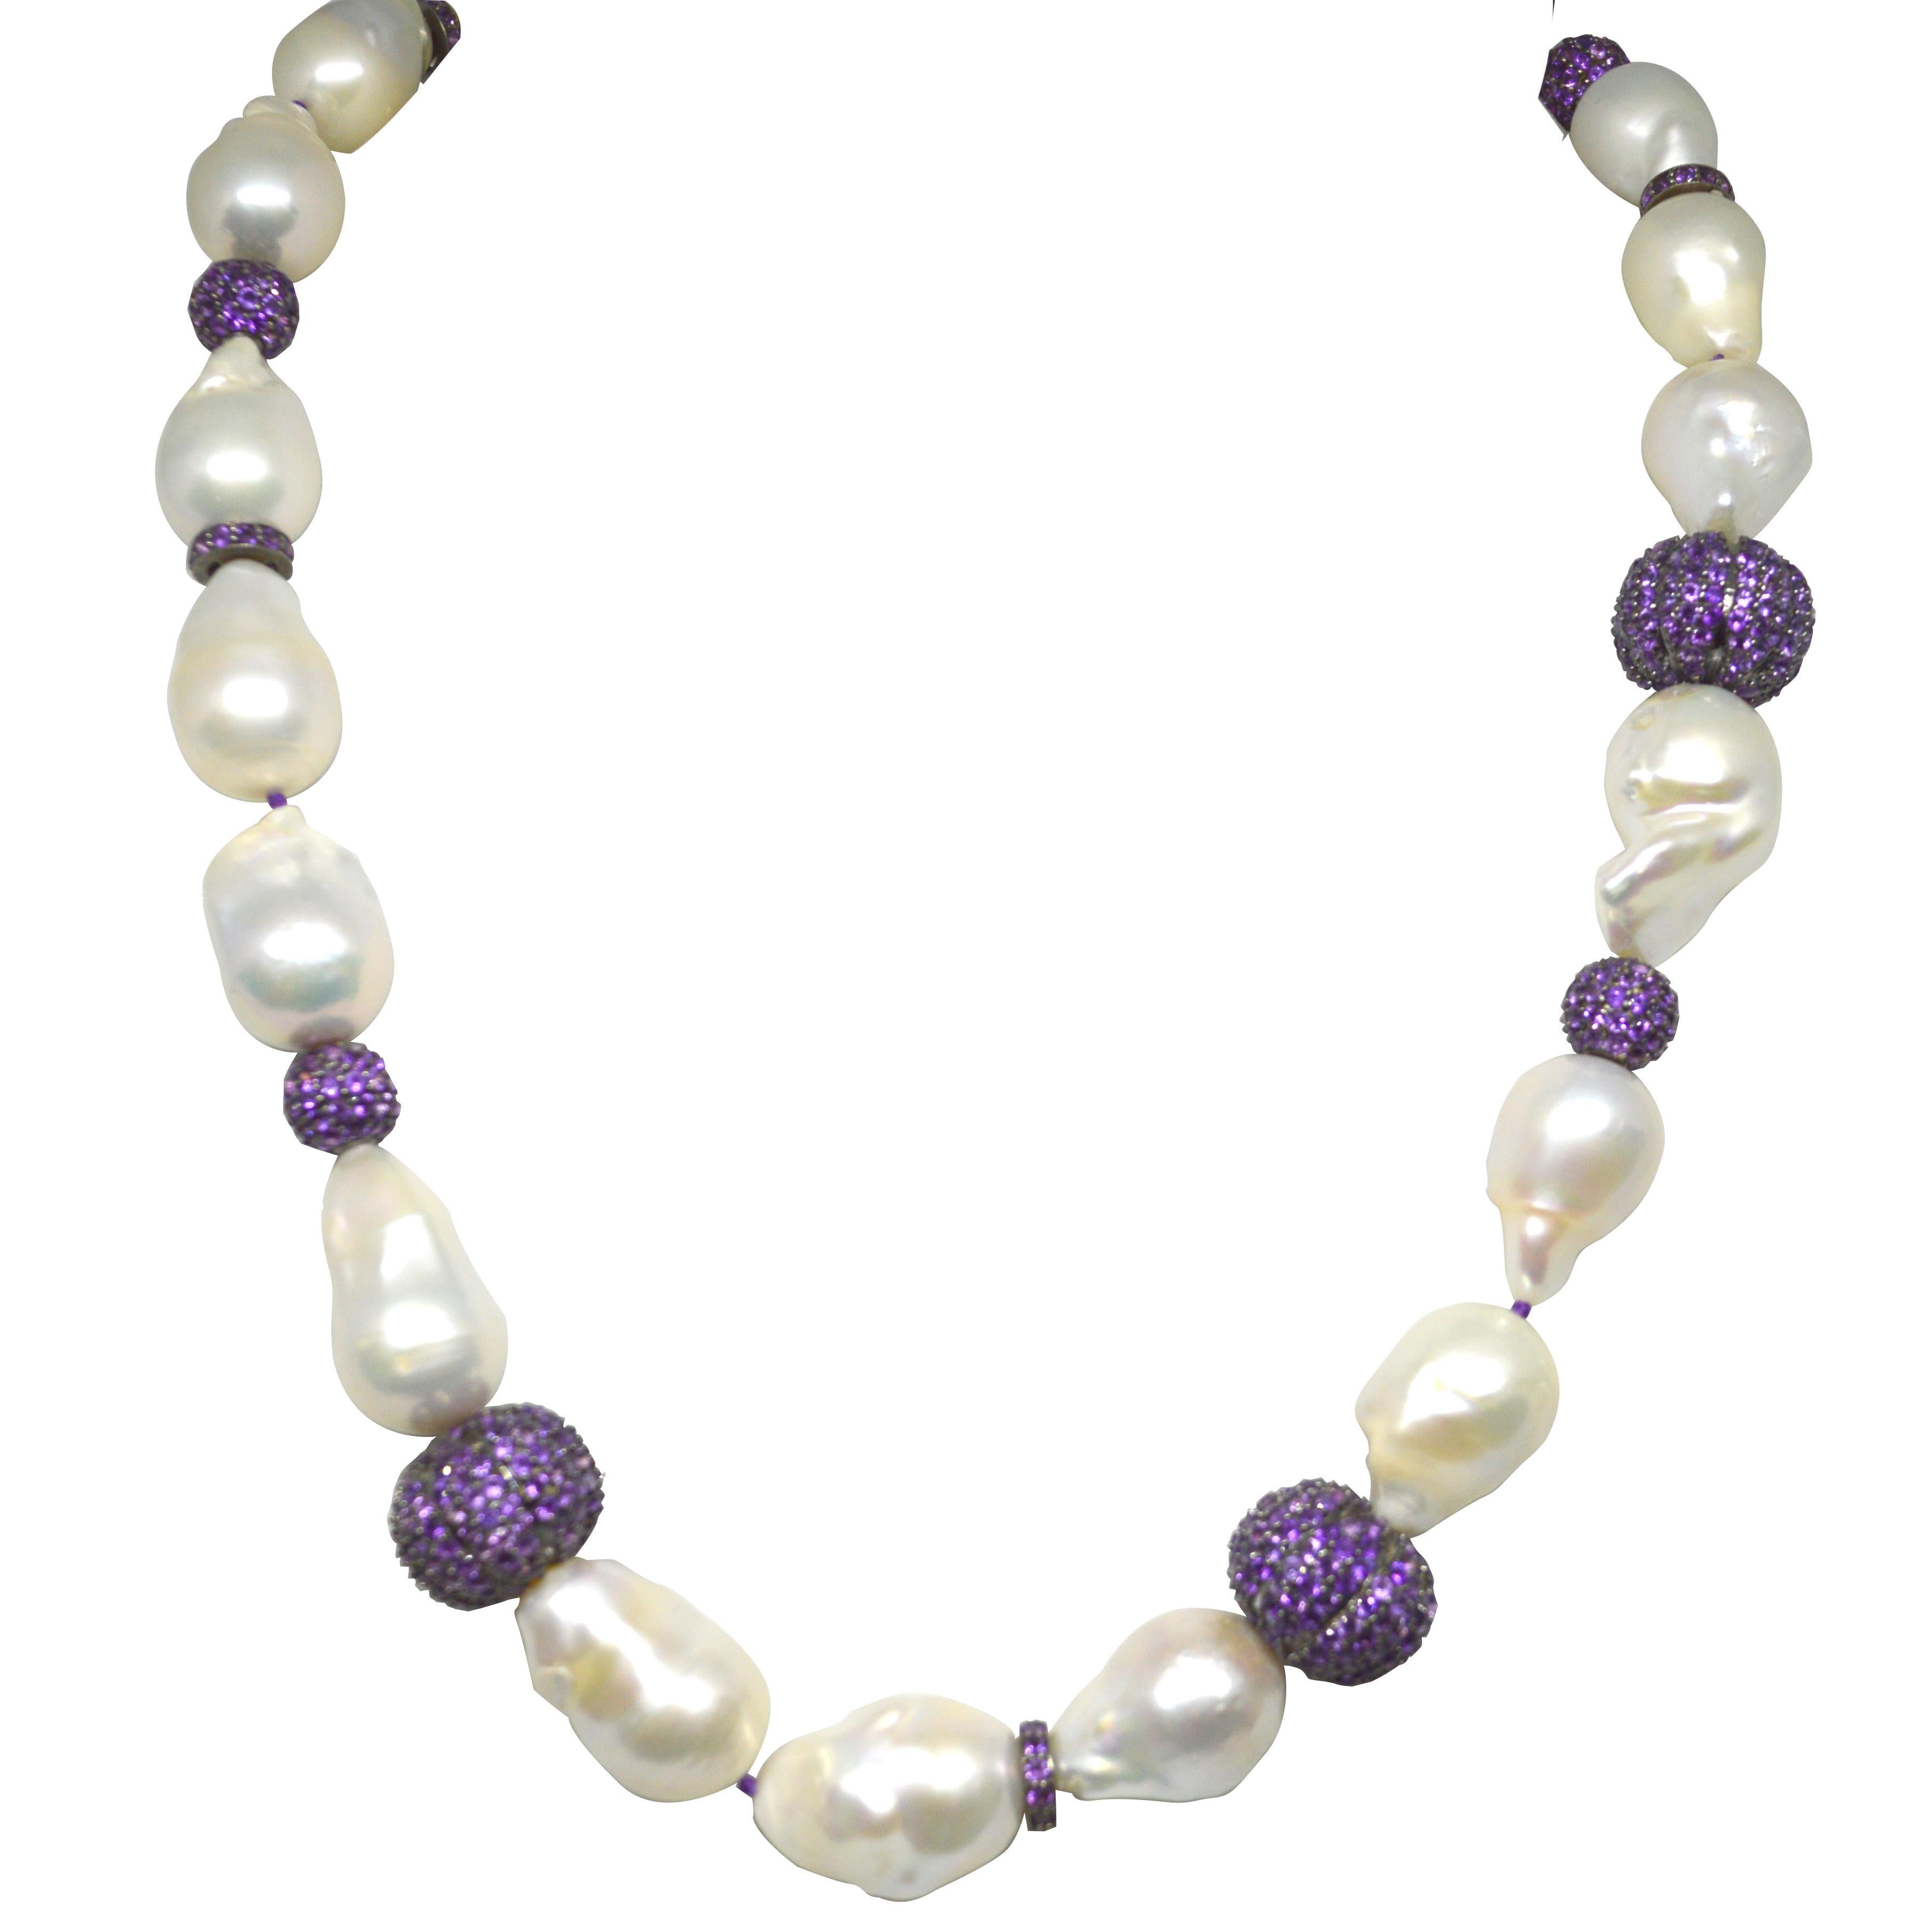 Stunning large Baroque Fresh Water Pearls with random Pave Amethyst & Sterling Silver beads. Pearls range from 22mm up to 28.7mm long and the Pave Amethyst beads are 10mm round 10x3mm rondel and 15x18mm melon shape.
Hand knotted on purple thread